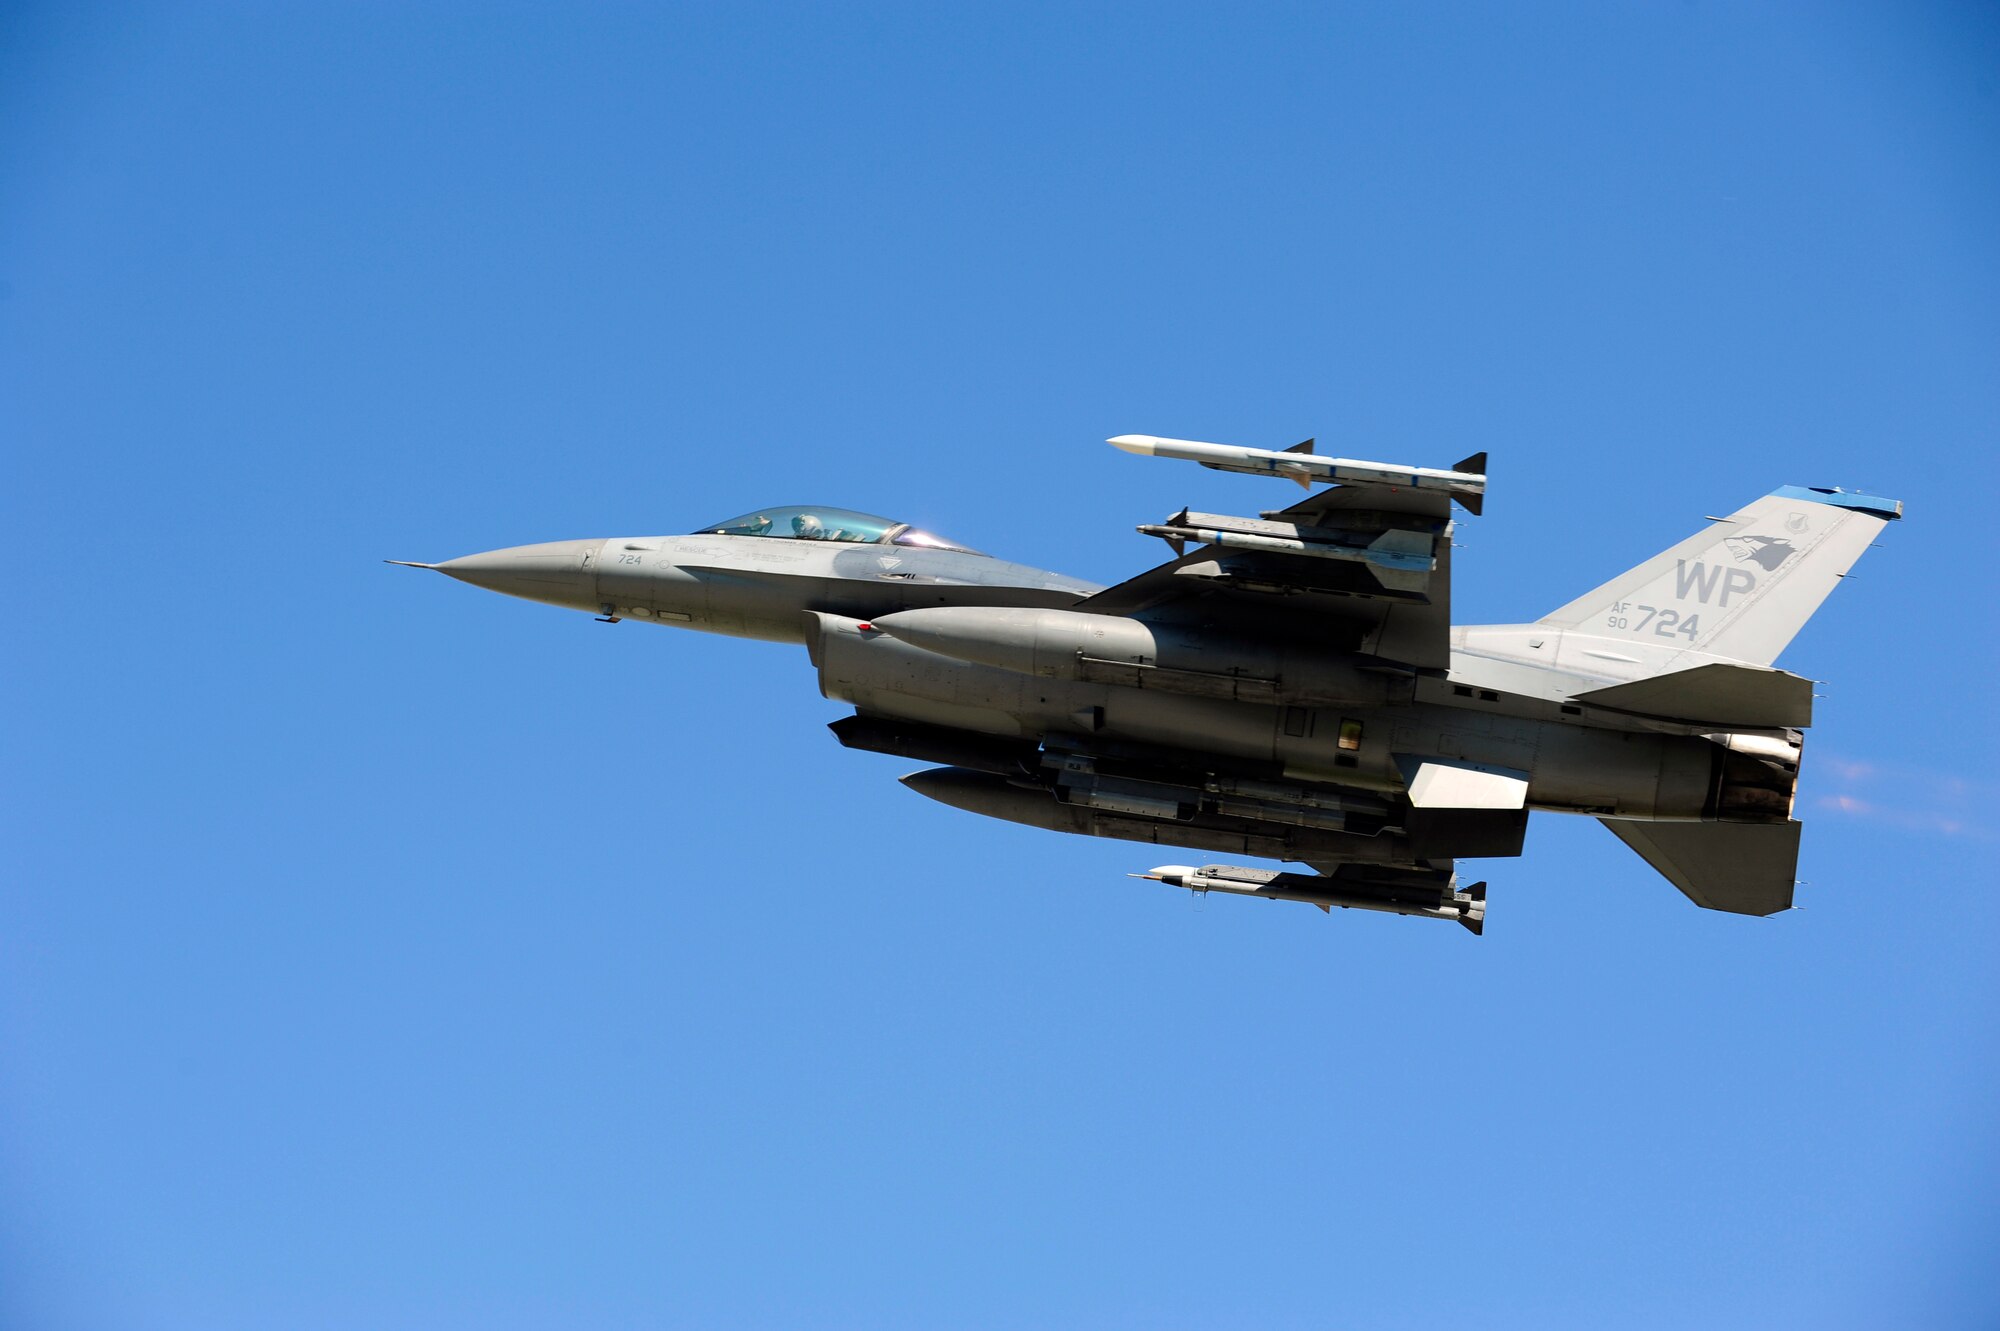 An F-16 Fighting Falcon departs from Kunsan Air Base, Sept. 10, 2014. The F-16 is being flown to Osan AB to temporarily operate flying missions while the runway at Kunsan is under construction for repairs. (U.S. Air Force photo by Senior Airman Taylor Curry/Released)